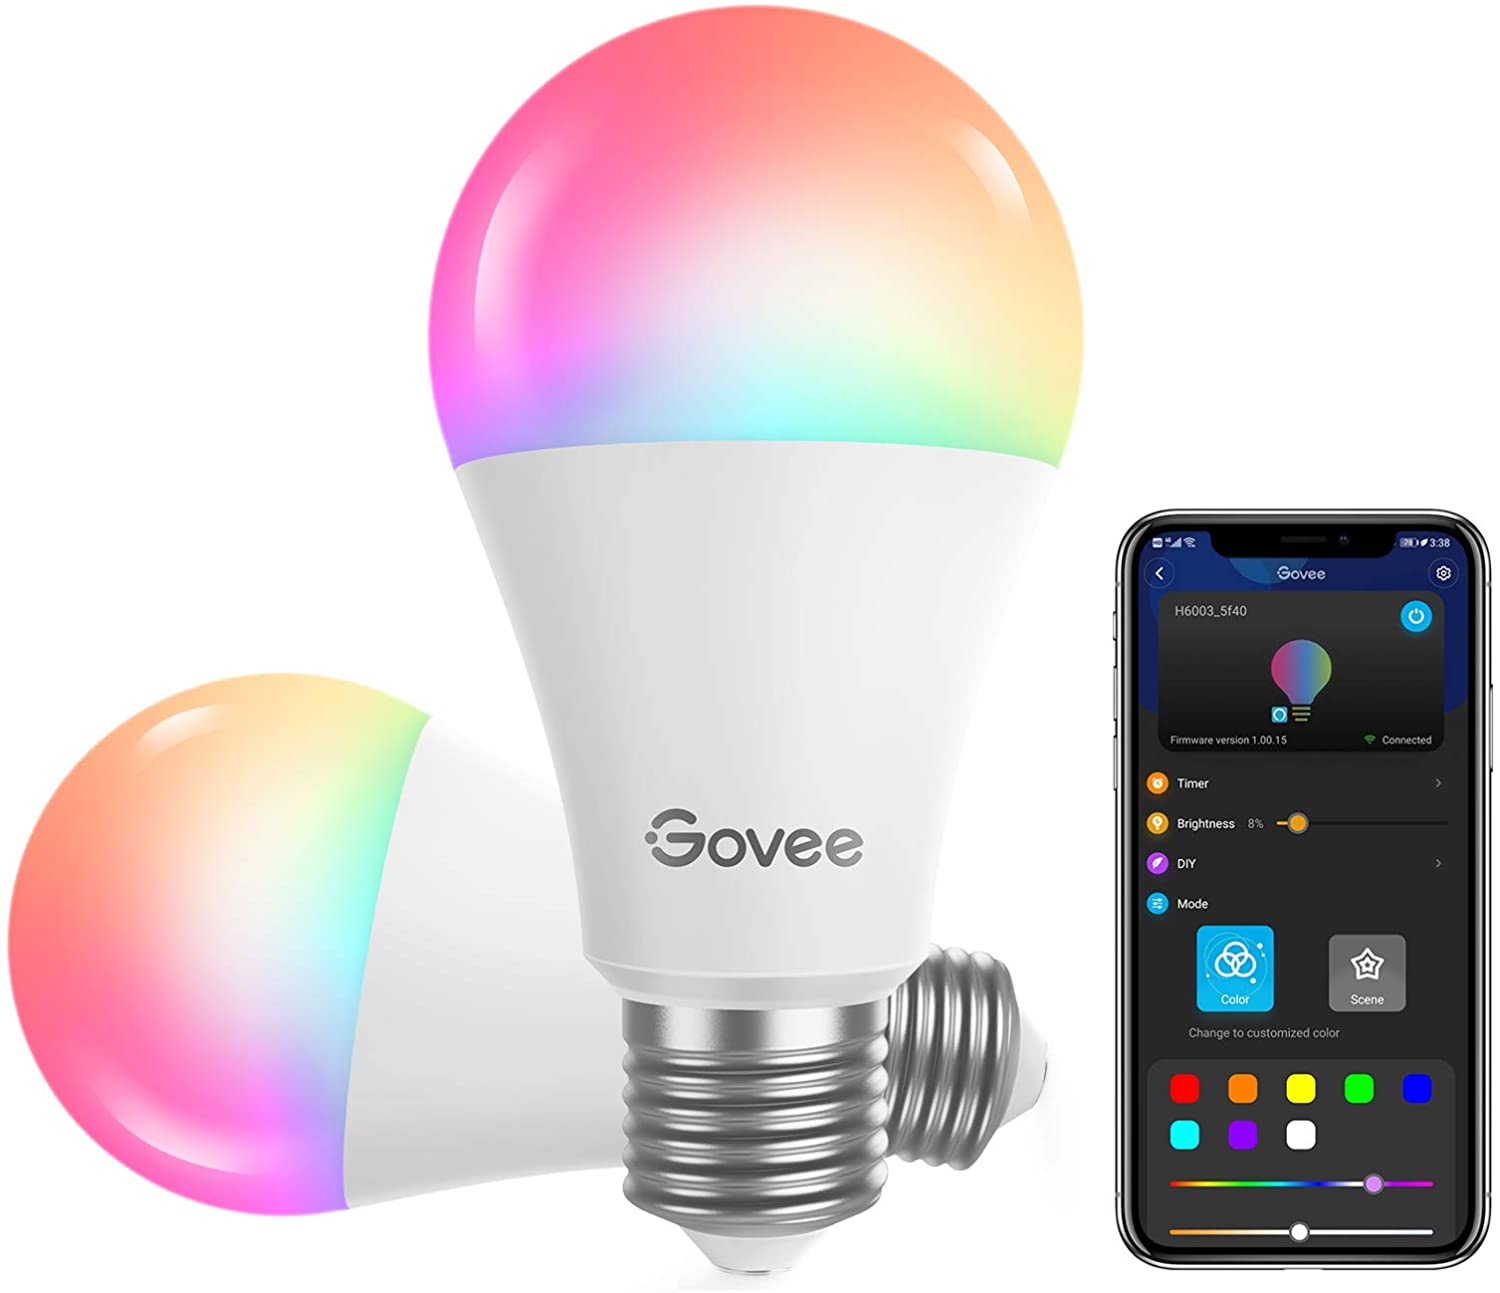 Govee vs. Sengled: Which smart light brand is right for your house?